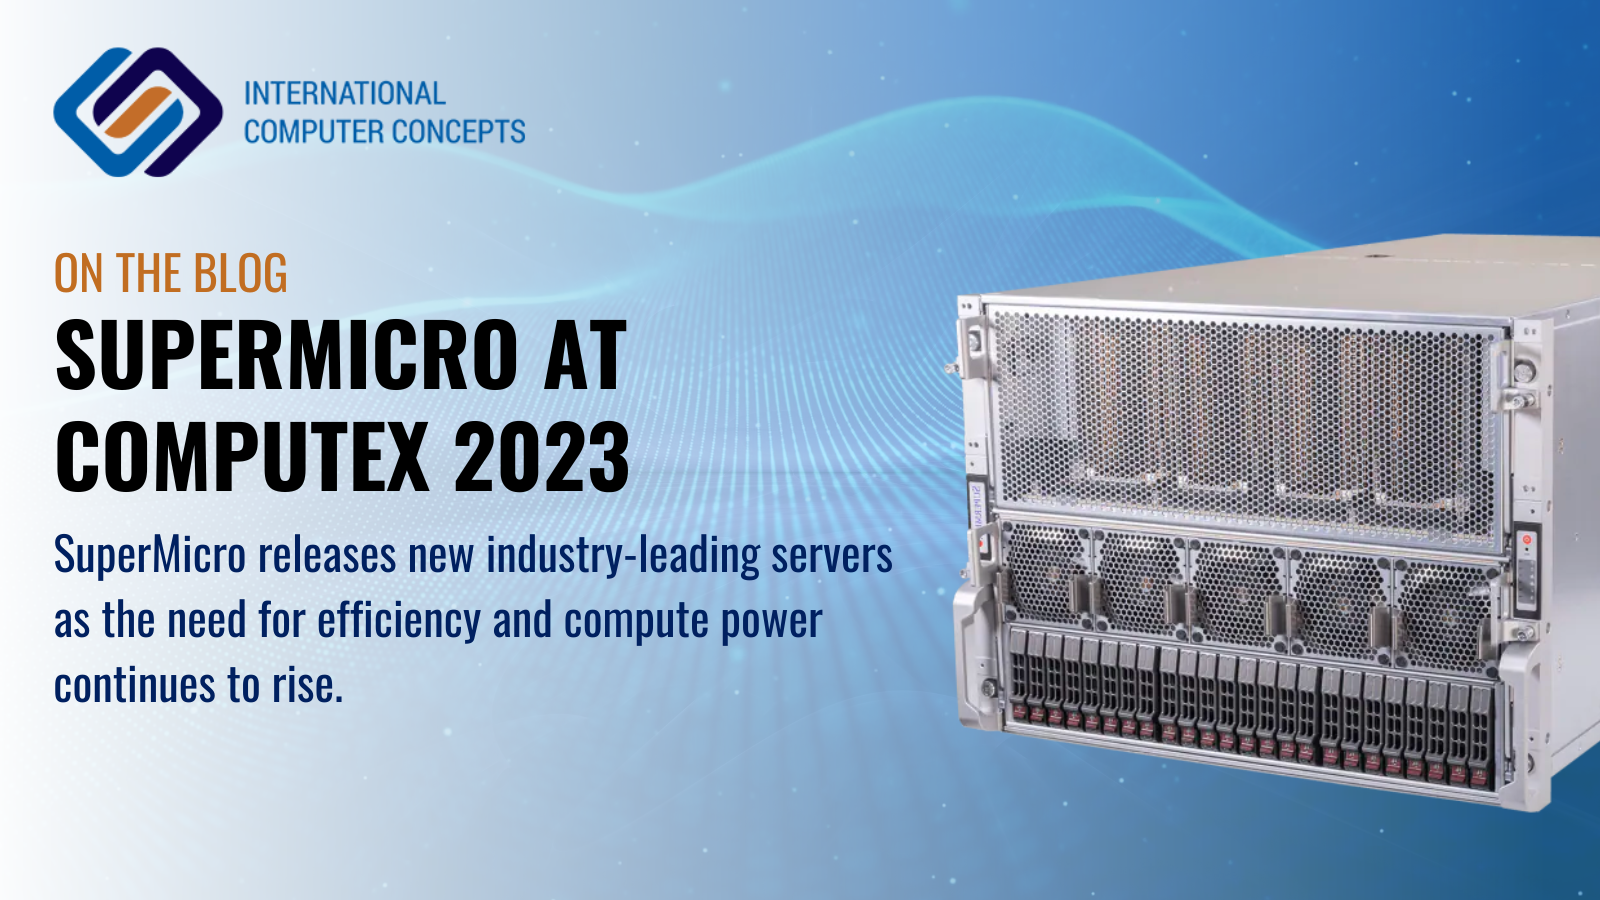 SuperMicro releases industry leading servers at COMPUTEX 2023